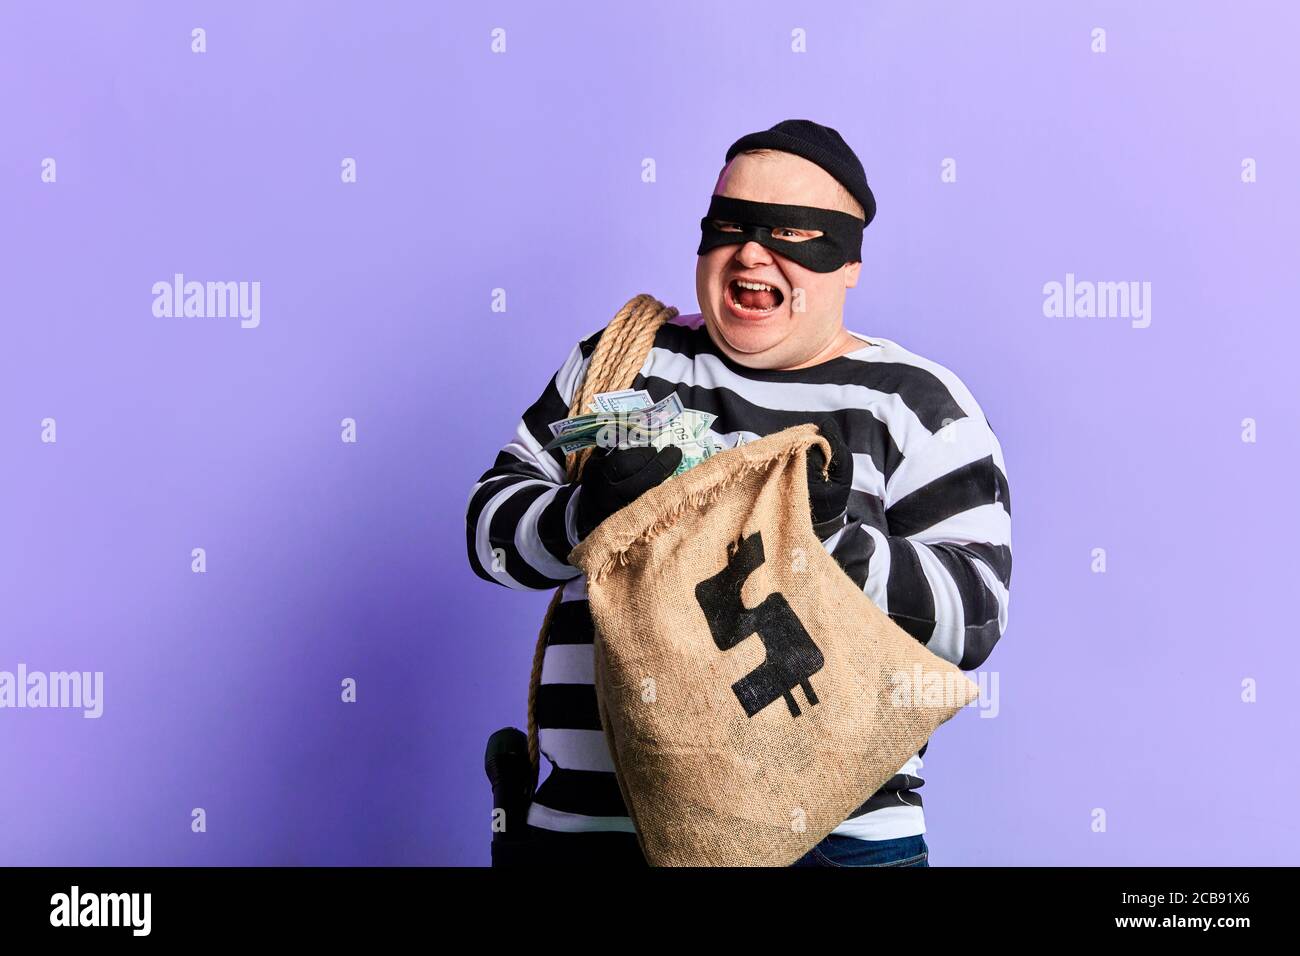 rich prisoner in striped uniform expresses his positive emotion and happiness. isolated blue background Stock Photo